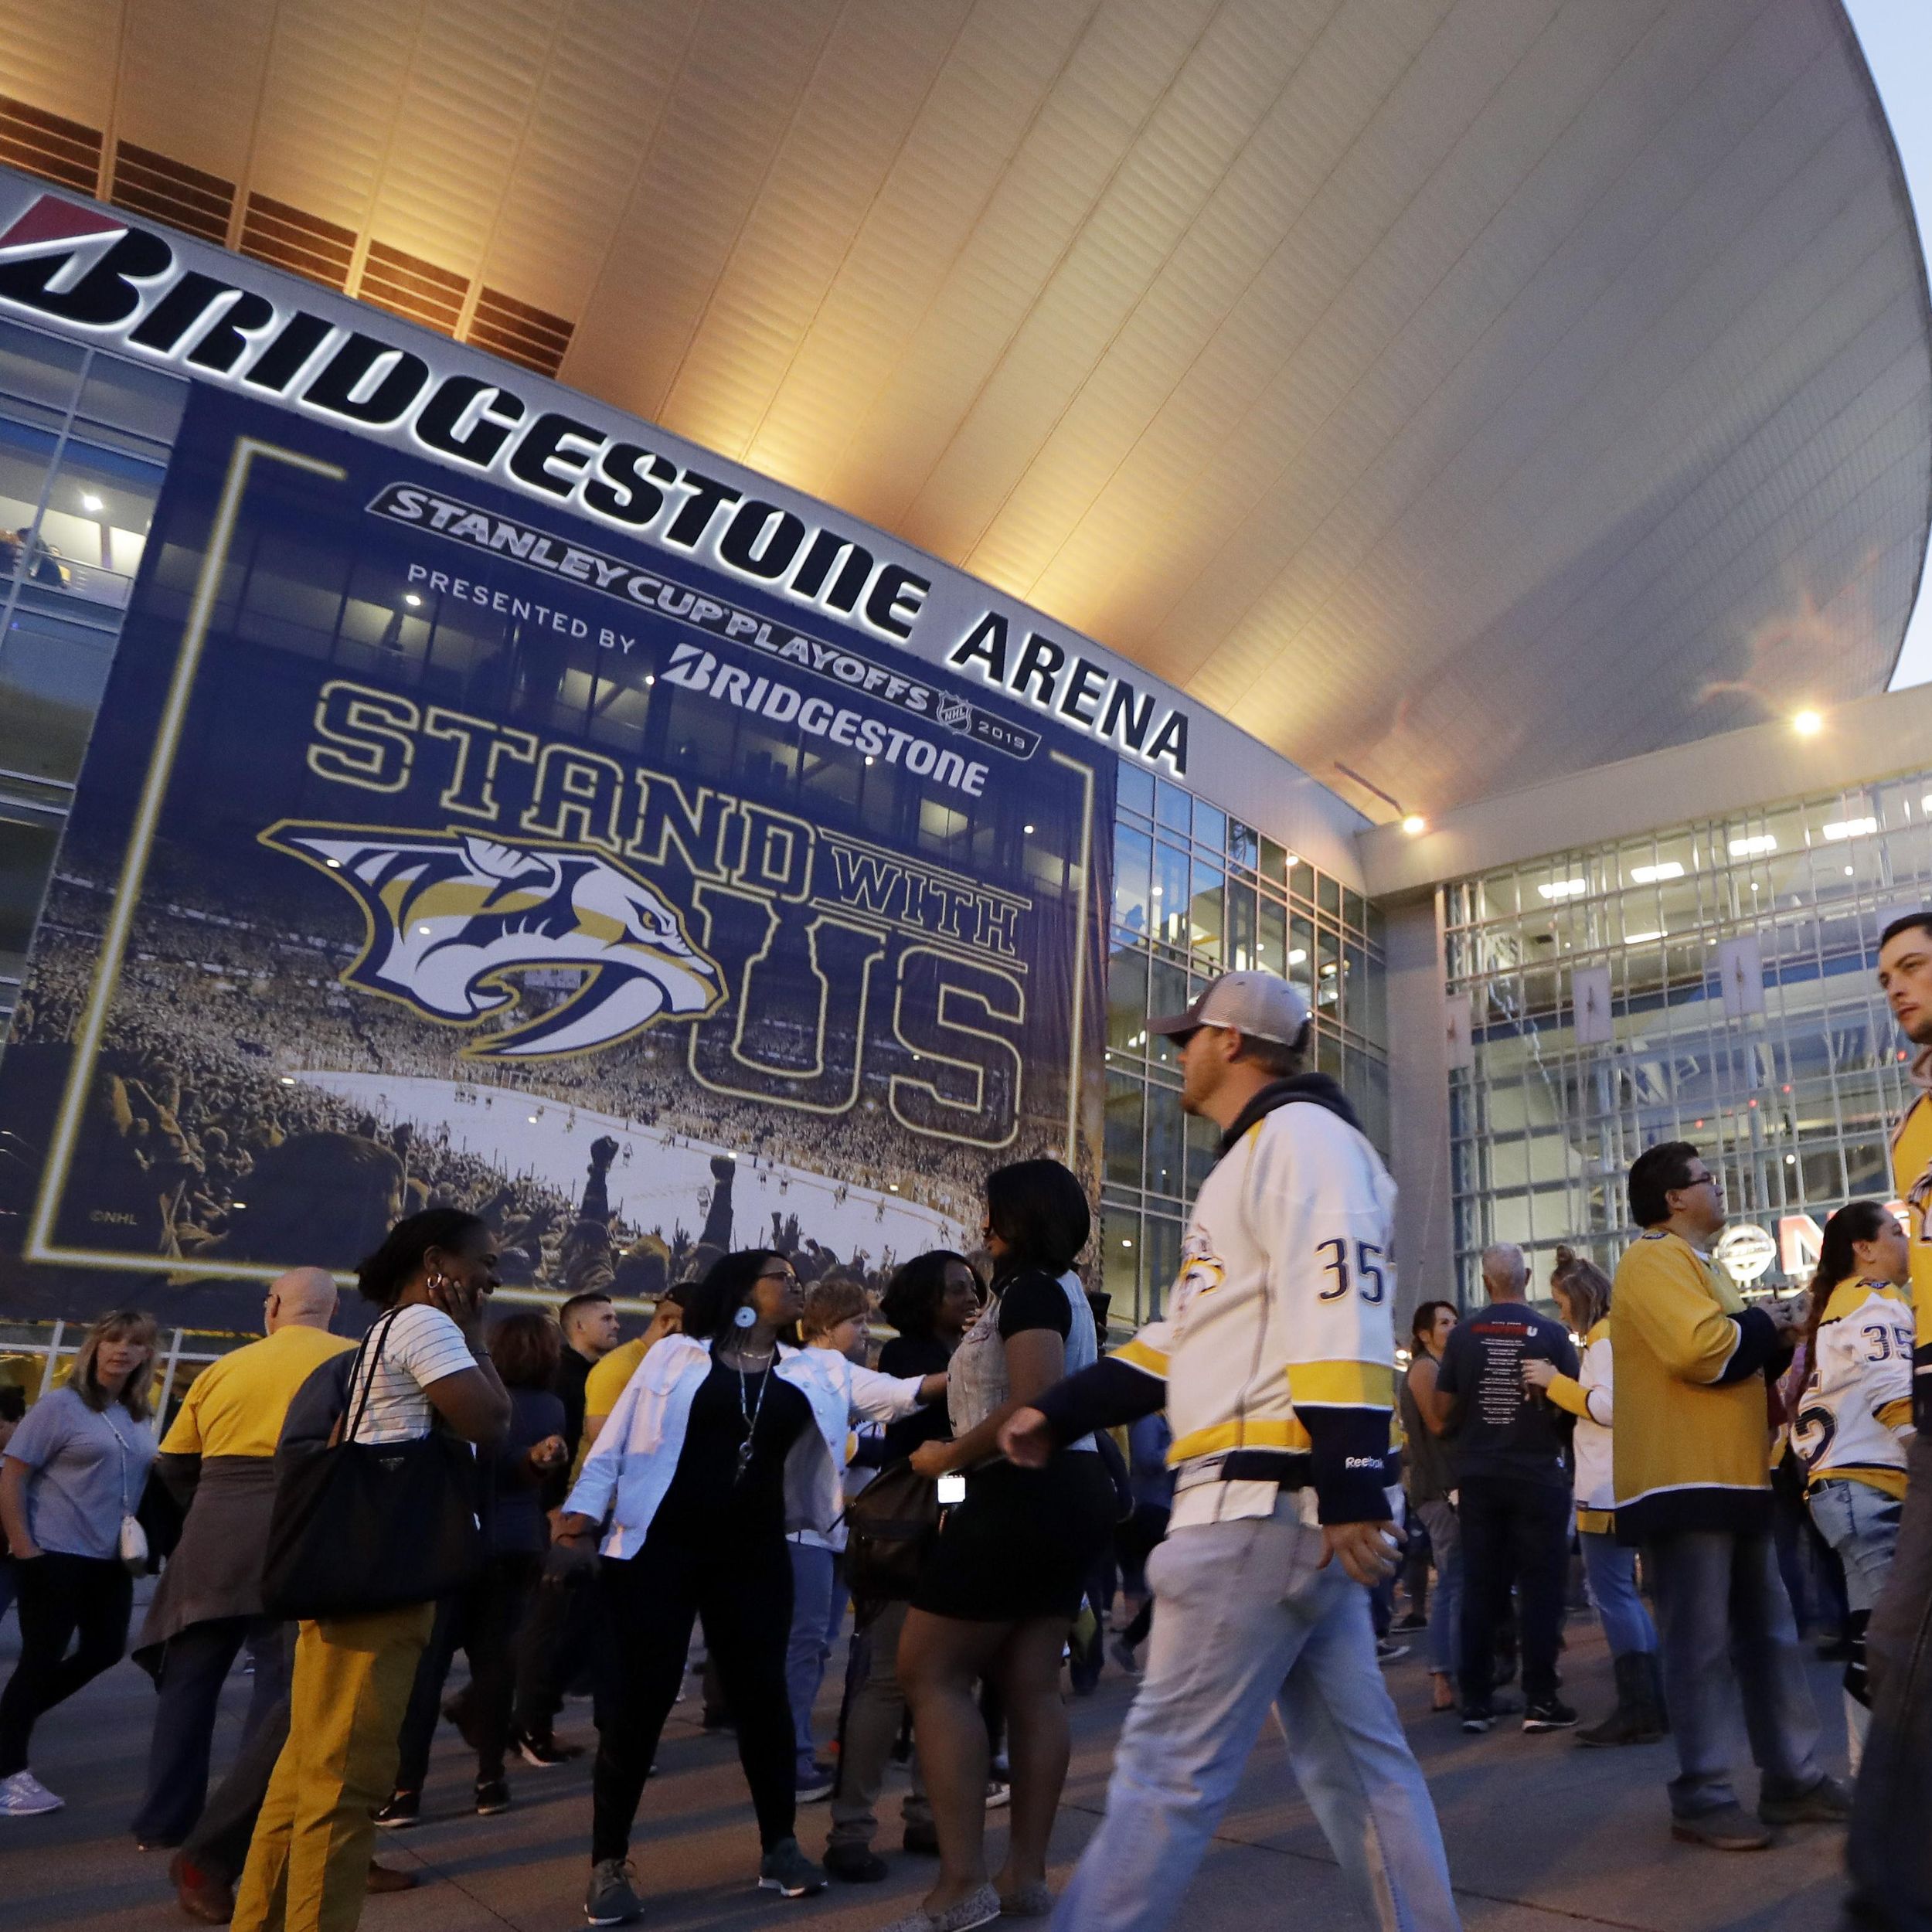 Nashville Predators Reach Agreement to Extend Arena Lease to 2049